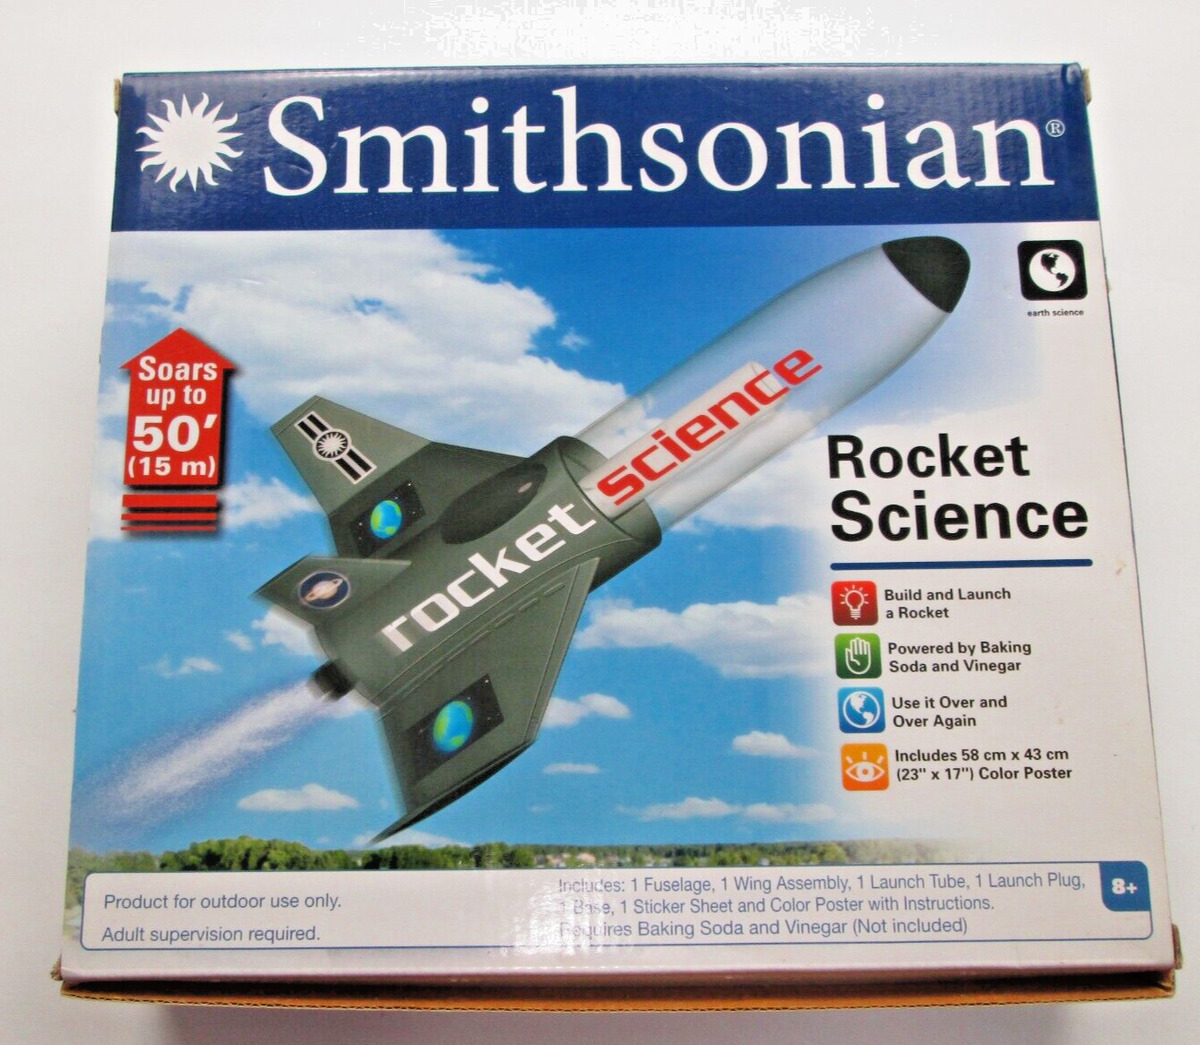 Earth Science Products for Kids - Earth Science Kits